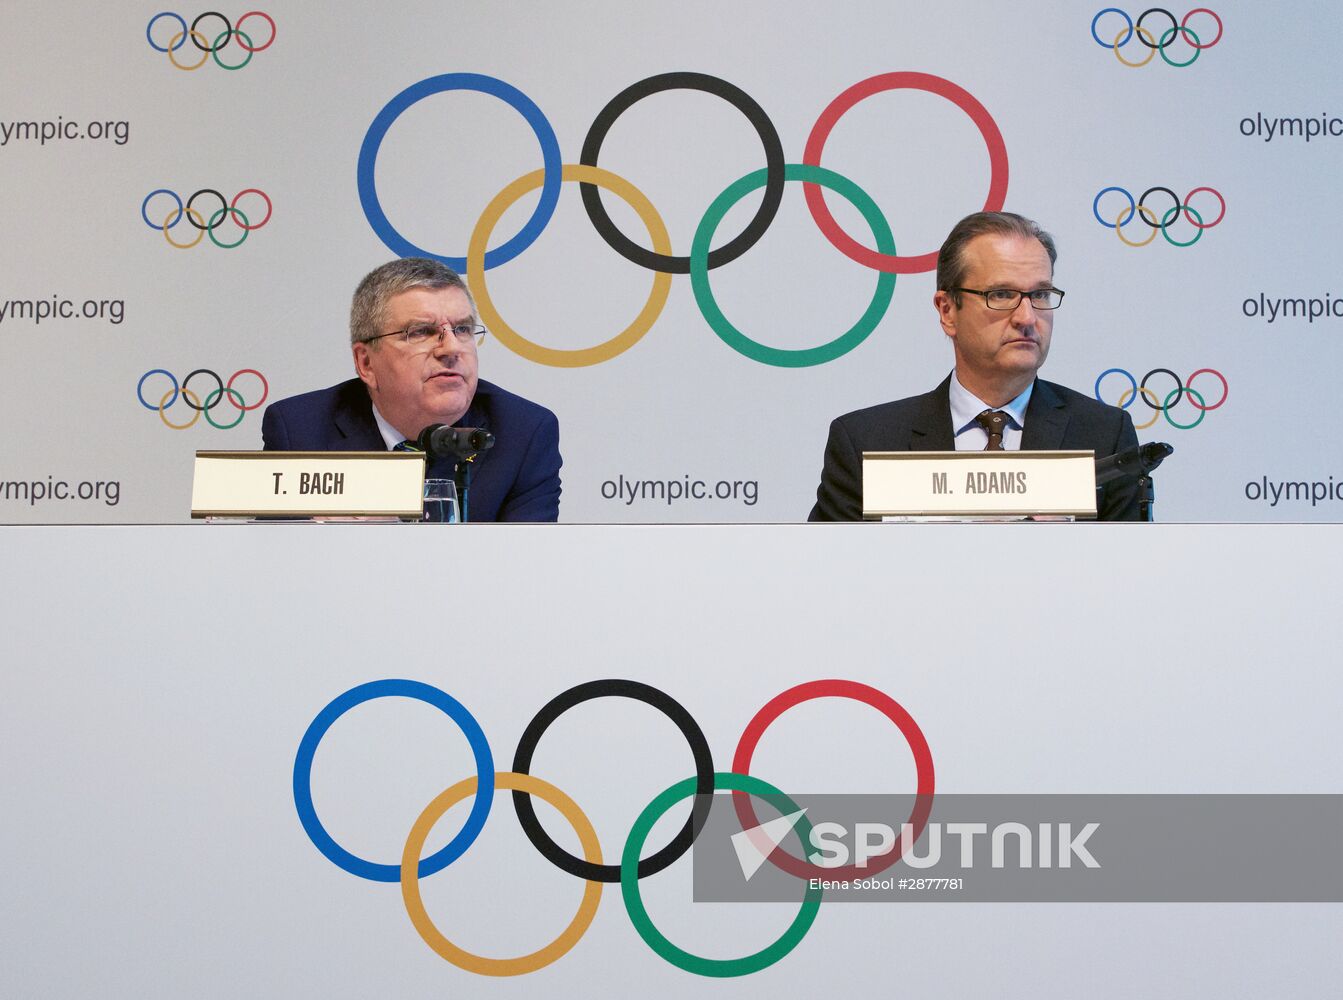 IOC decides against barring all Russian national team from RIO Olympics